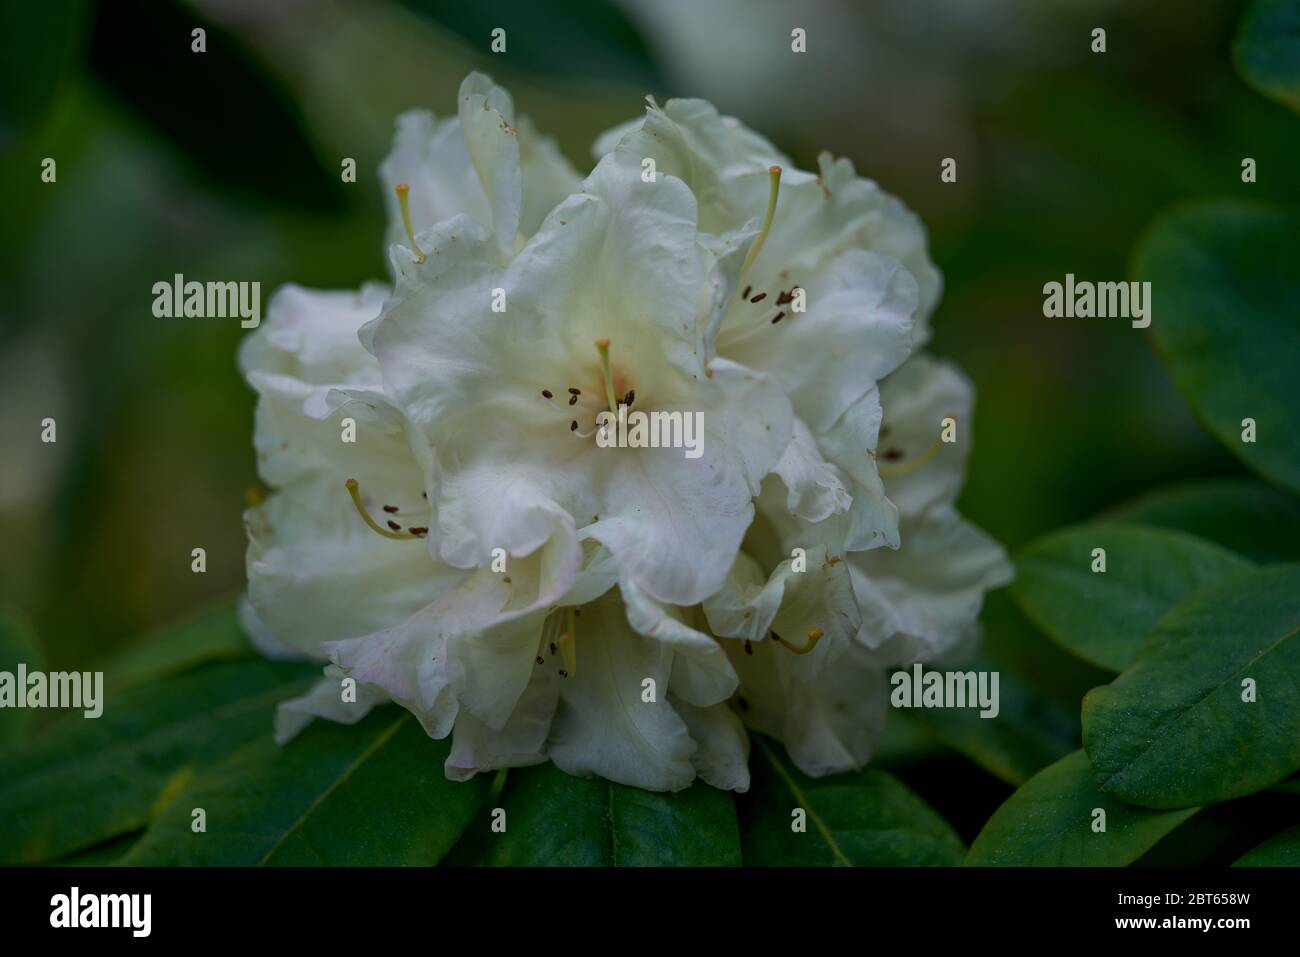 Lush rhododendron blossom close up Stock Photo